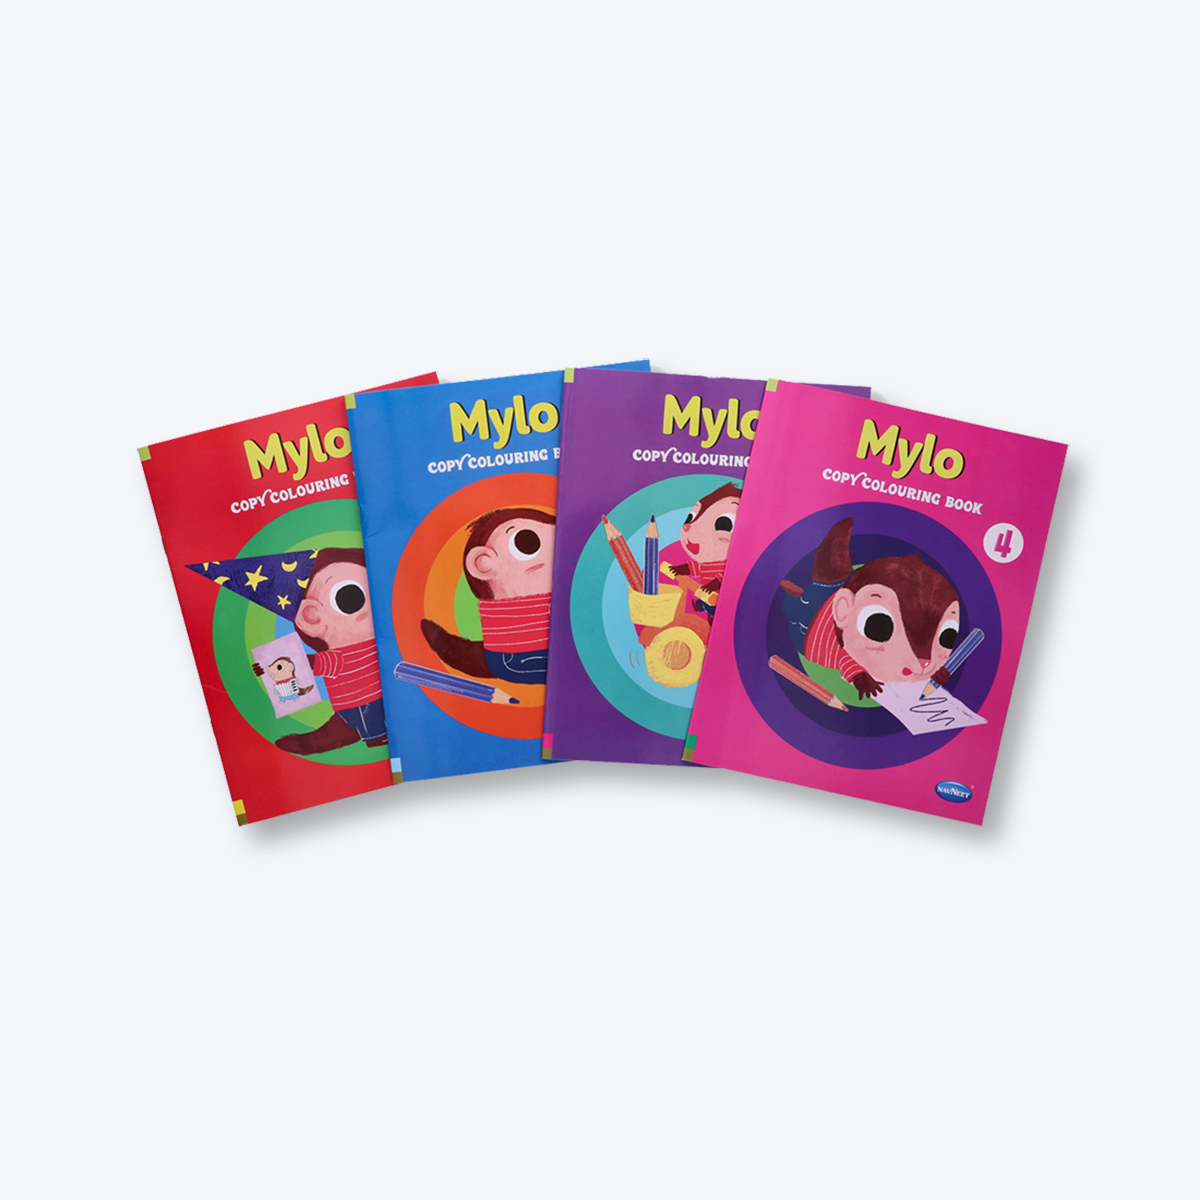 Navneet Mylo Copy Colouring Book series-Painting and colouring books for kids- Best for Children with Youva Stationery